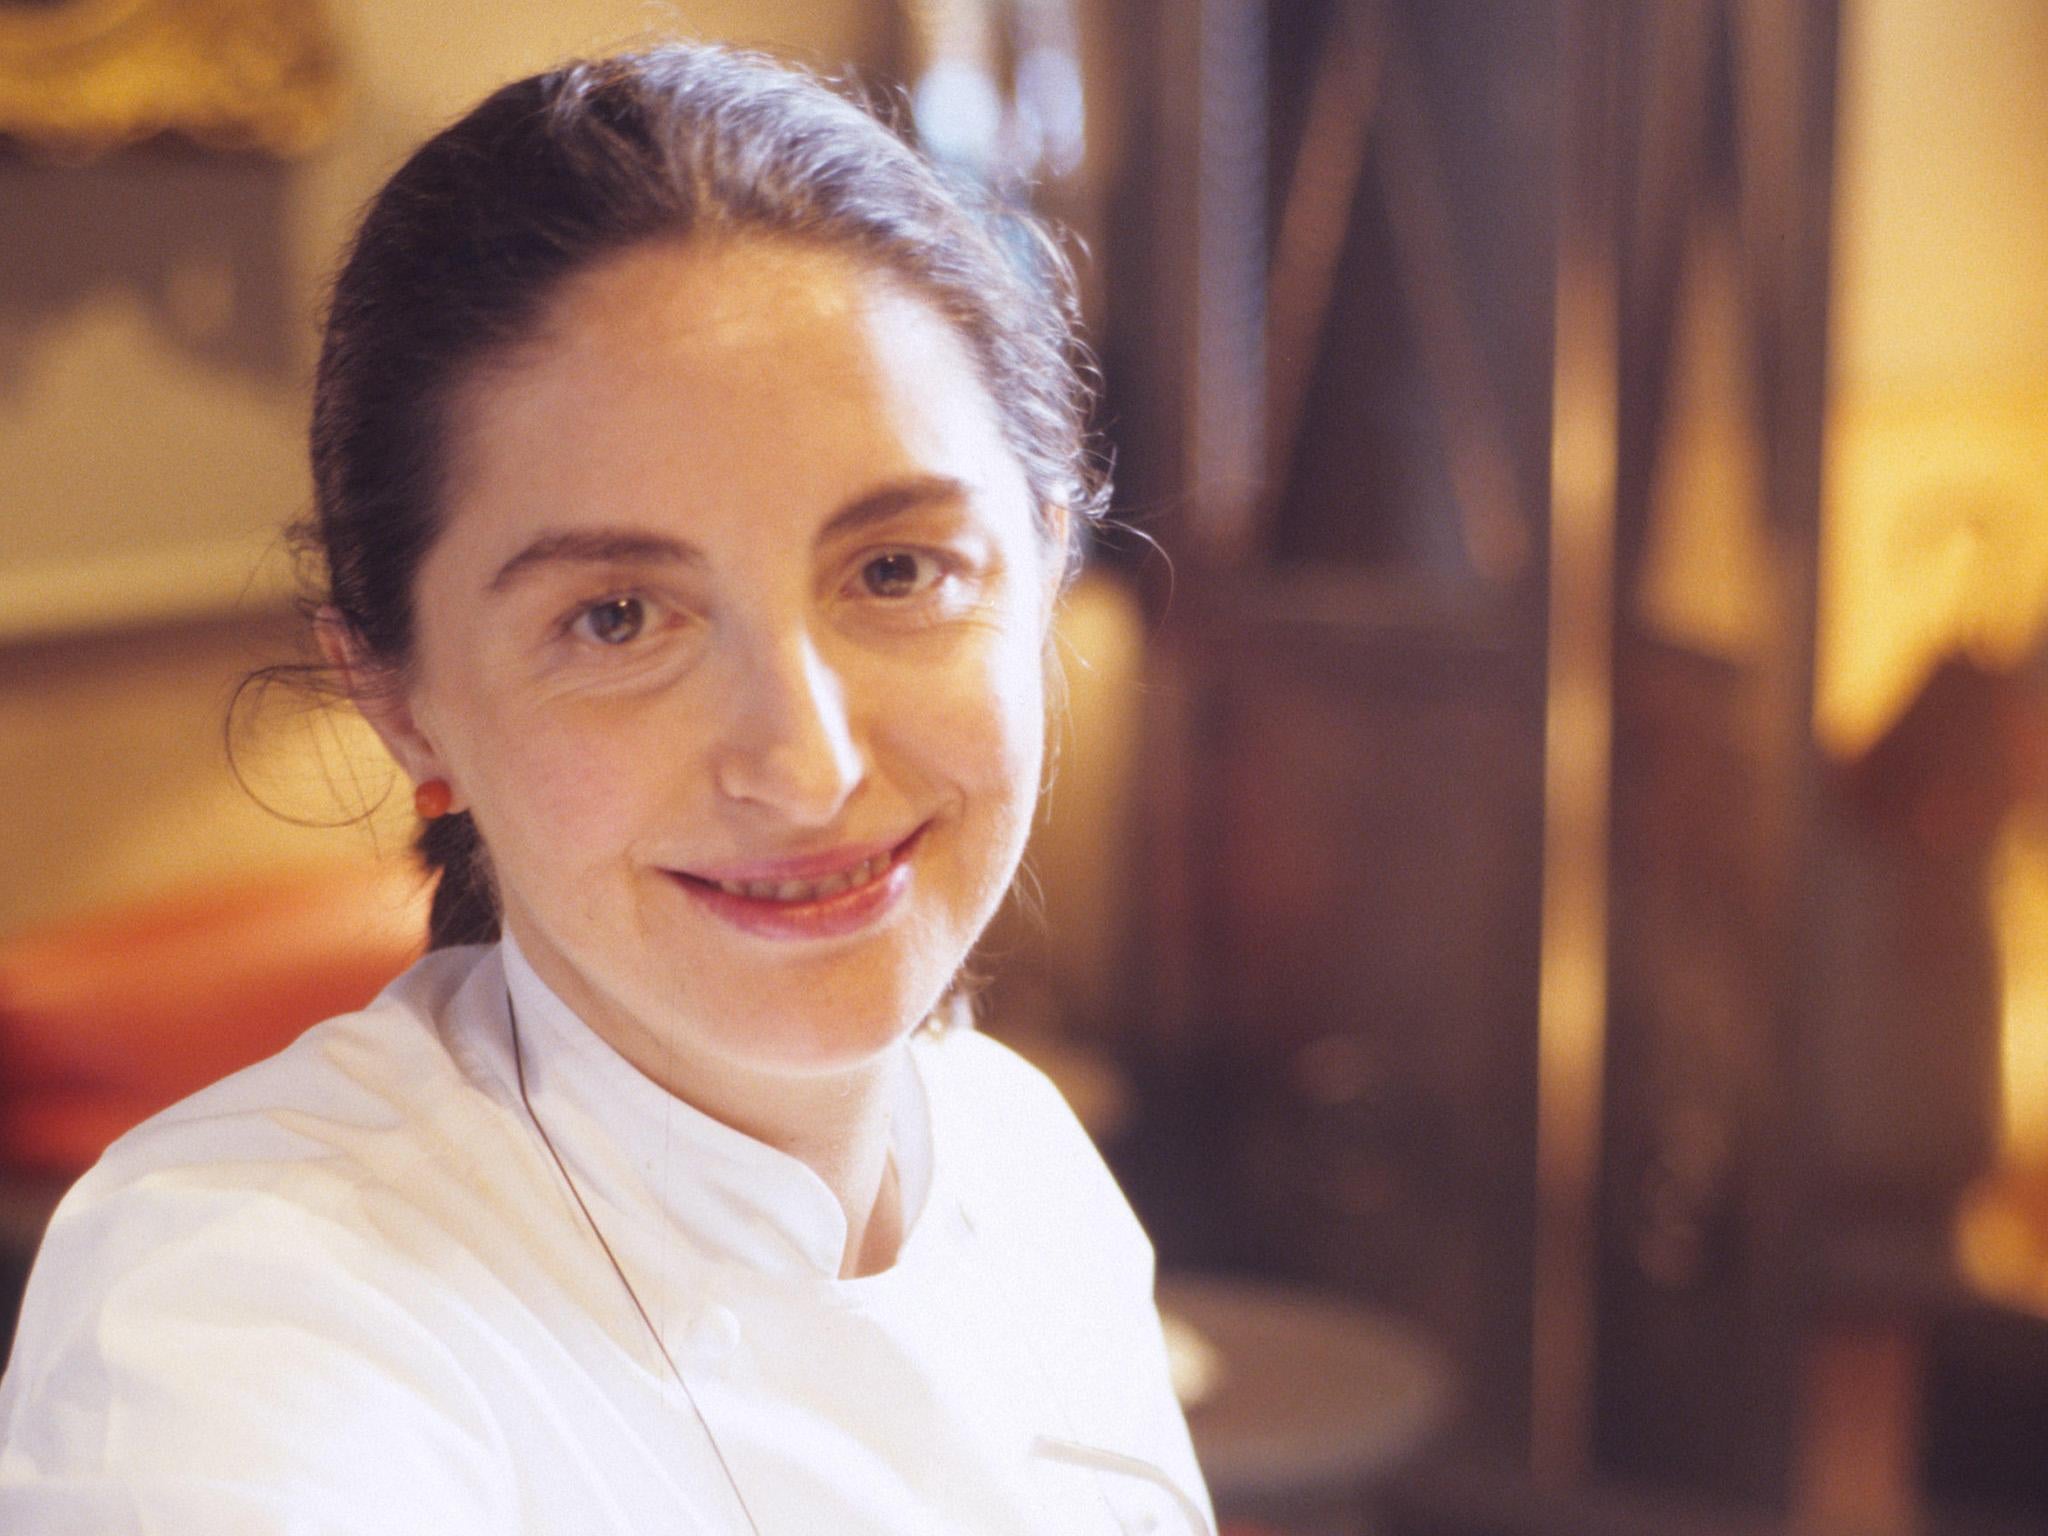 Elena Arzak is the fourth generation to work in her family’s restaurant in San Sebastian (Alamy)